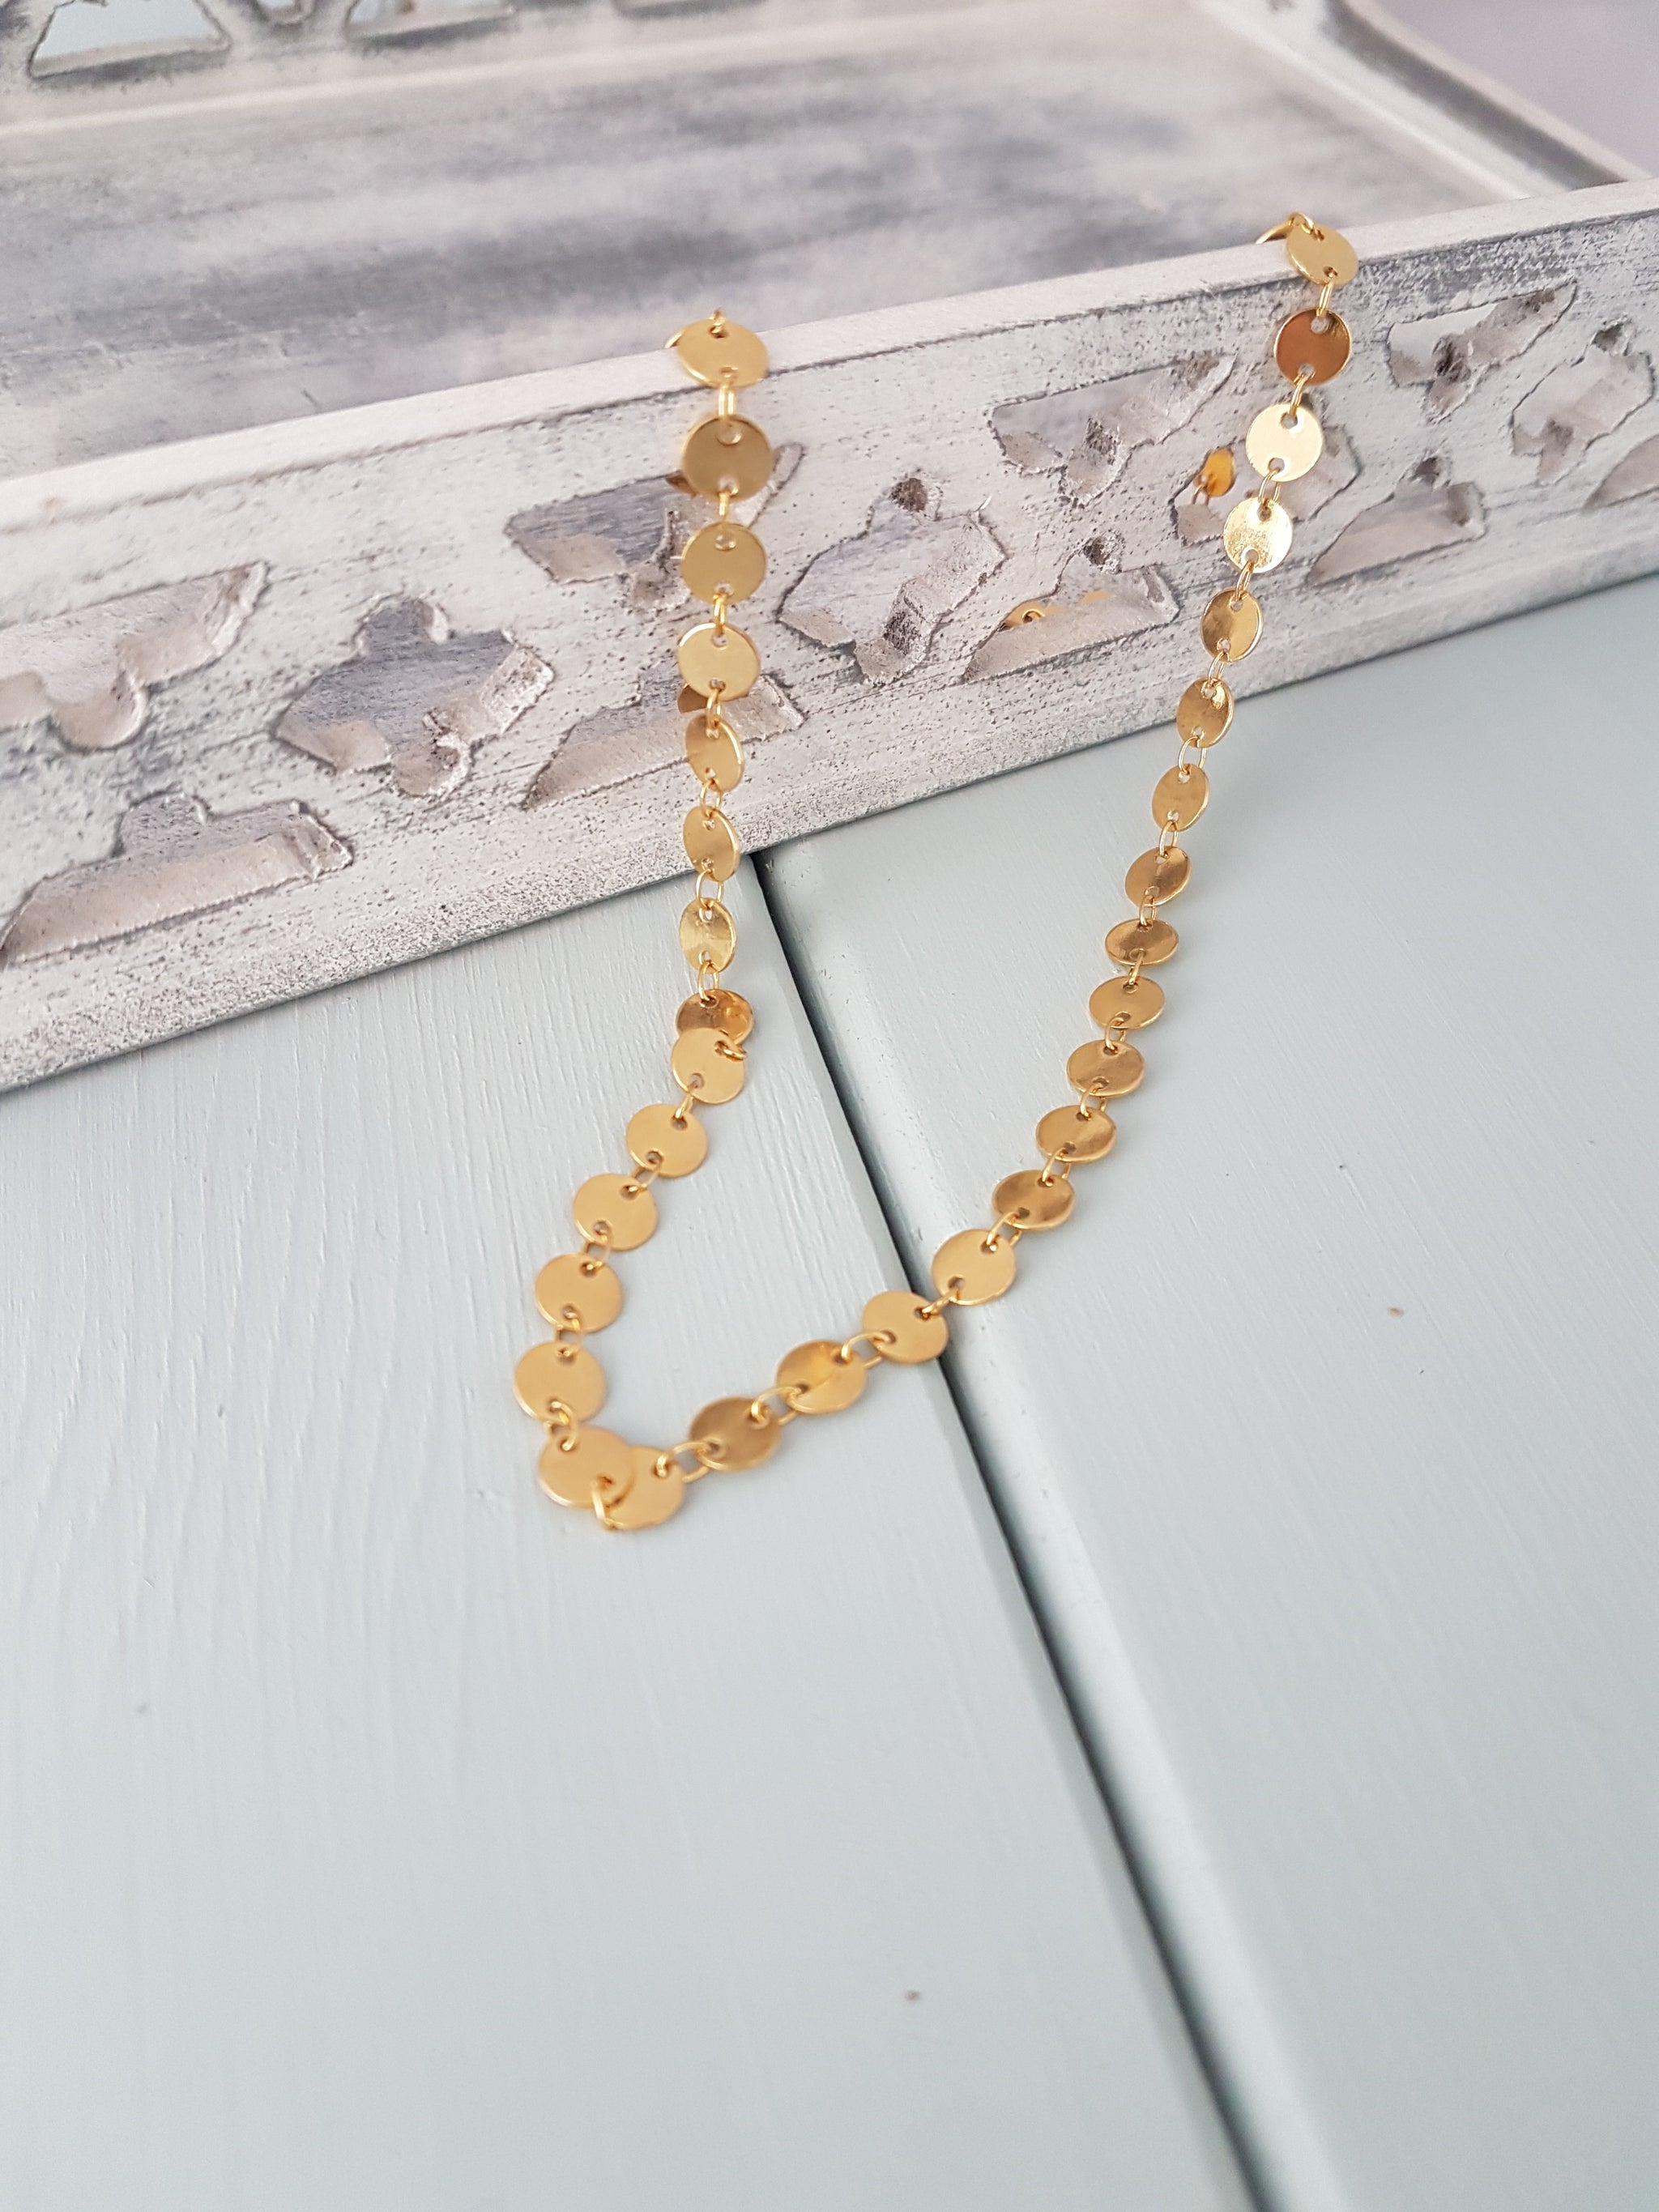 Tiny Boho Coin Choker Necklace - Gwen Delicious Jewelry Designs